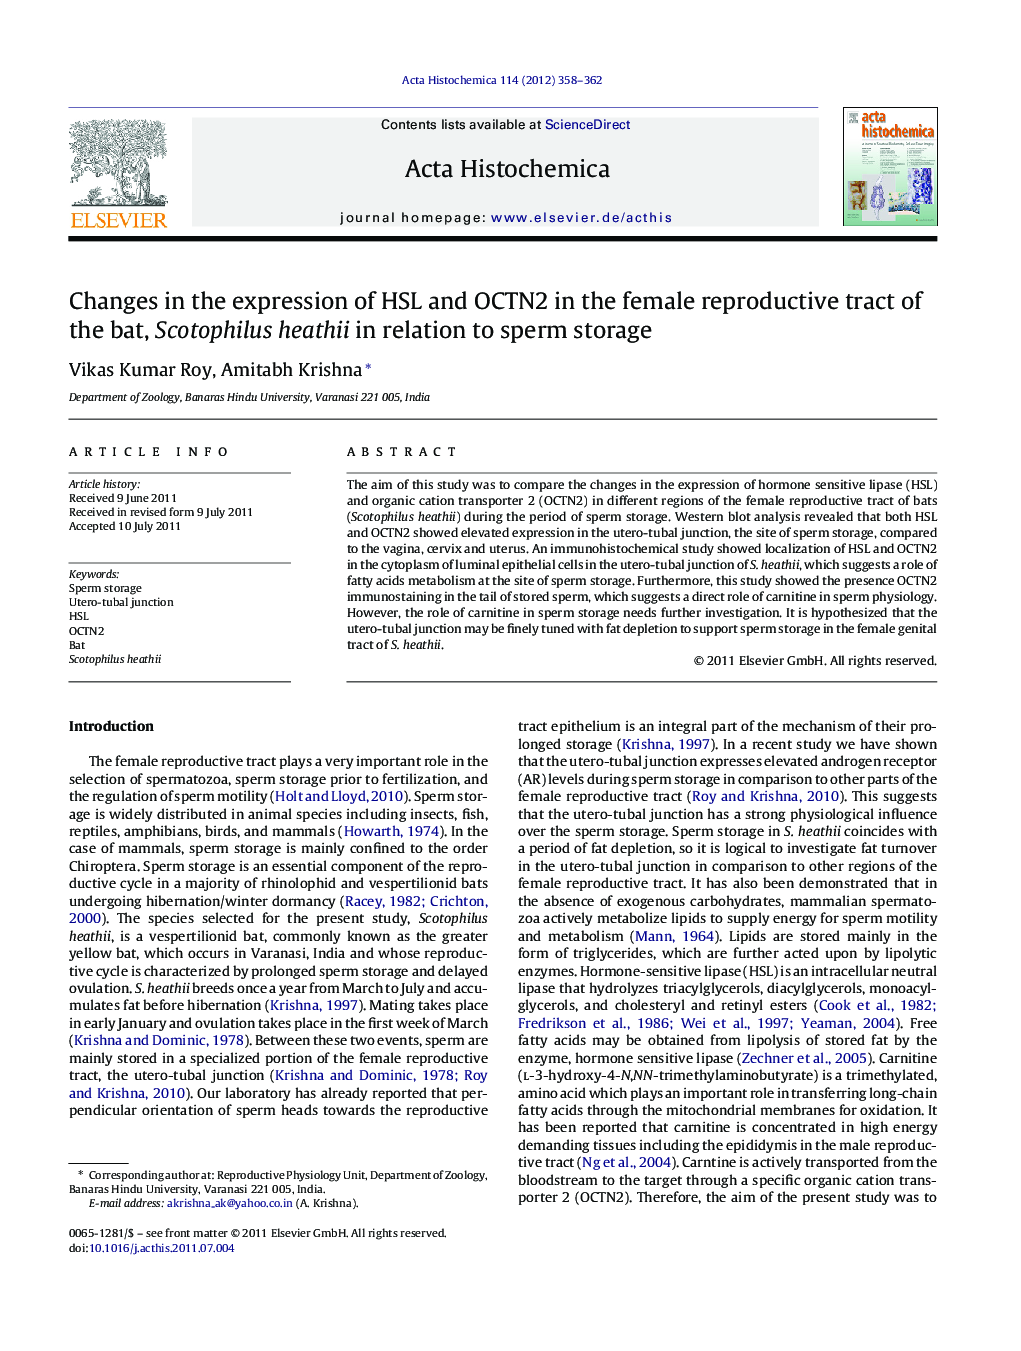 Changes in the expression of HSL and OCTN2 in the female reproductive tract of the bat, Scotophilus heathii in relation to sperm storage